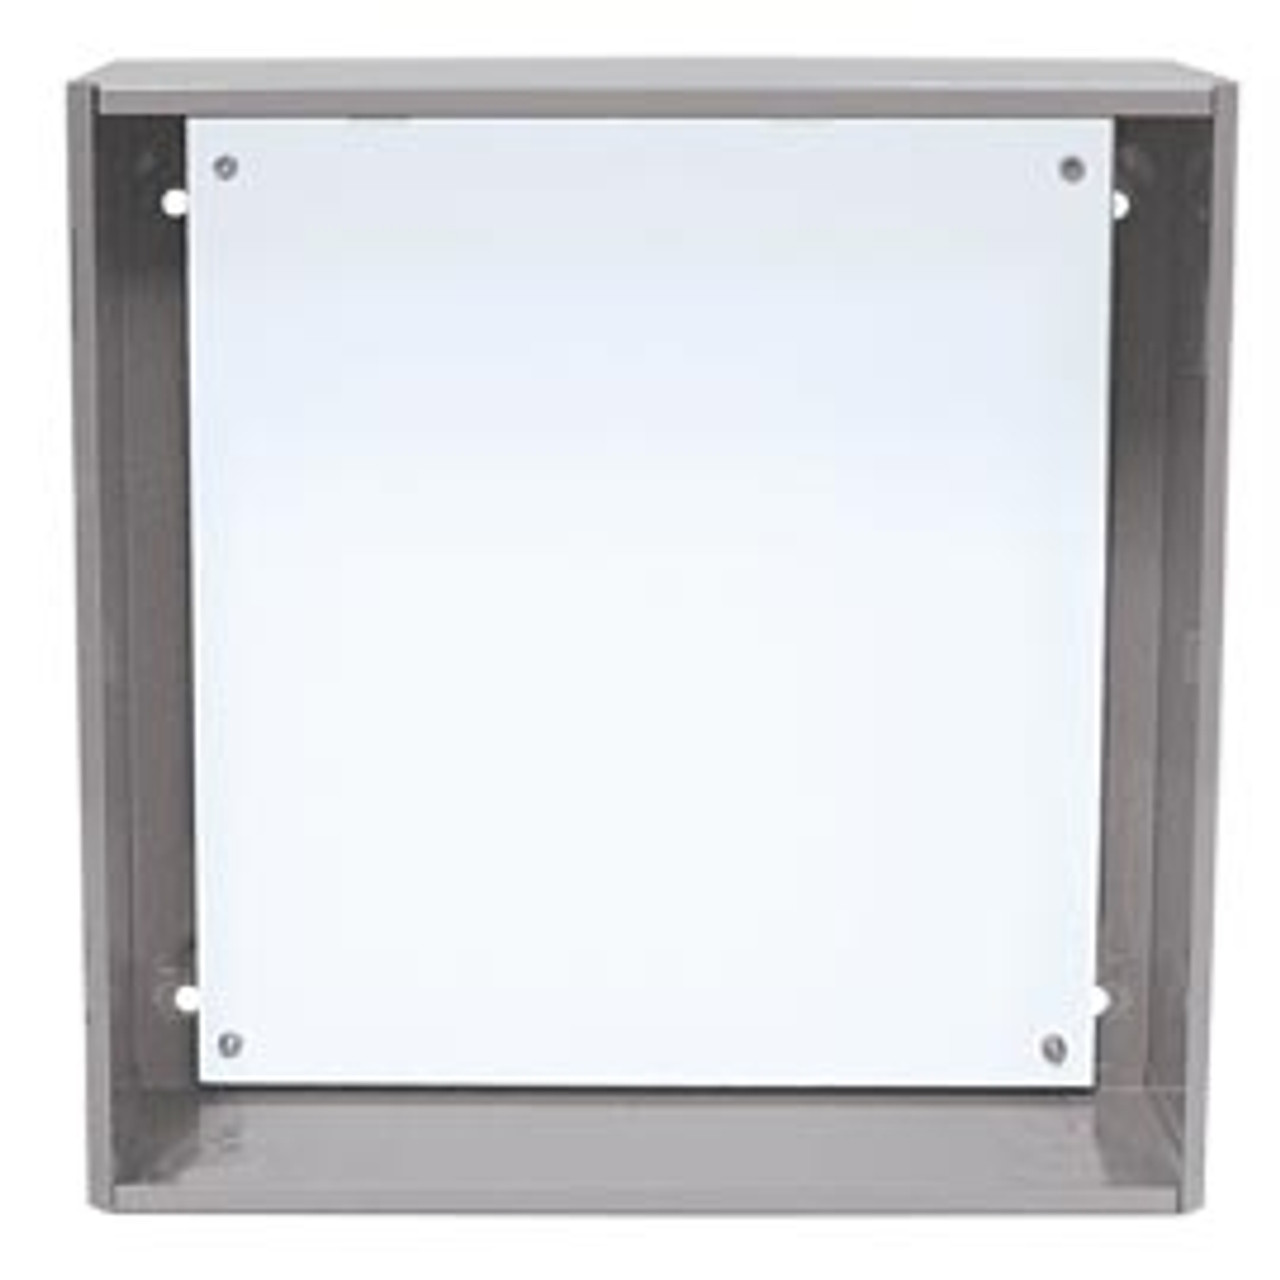 FUNCTIONAL DEVICES FUNSP4403L MH4400 Subpanel Polymetal 16.875H x 15.750W x .130T